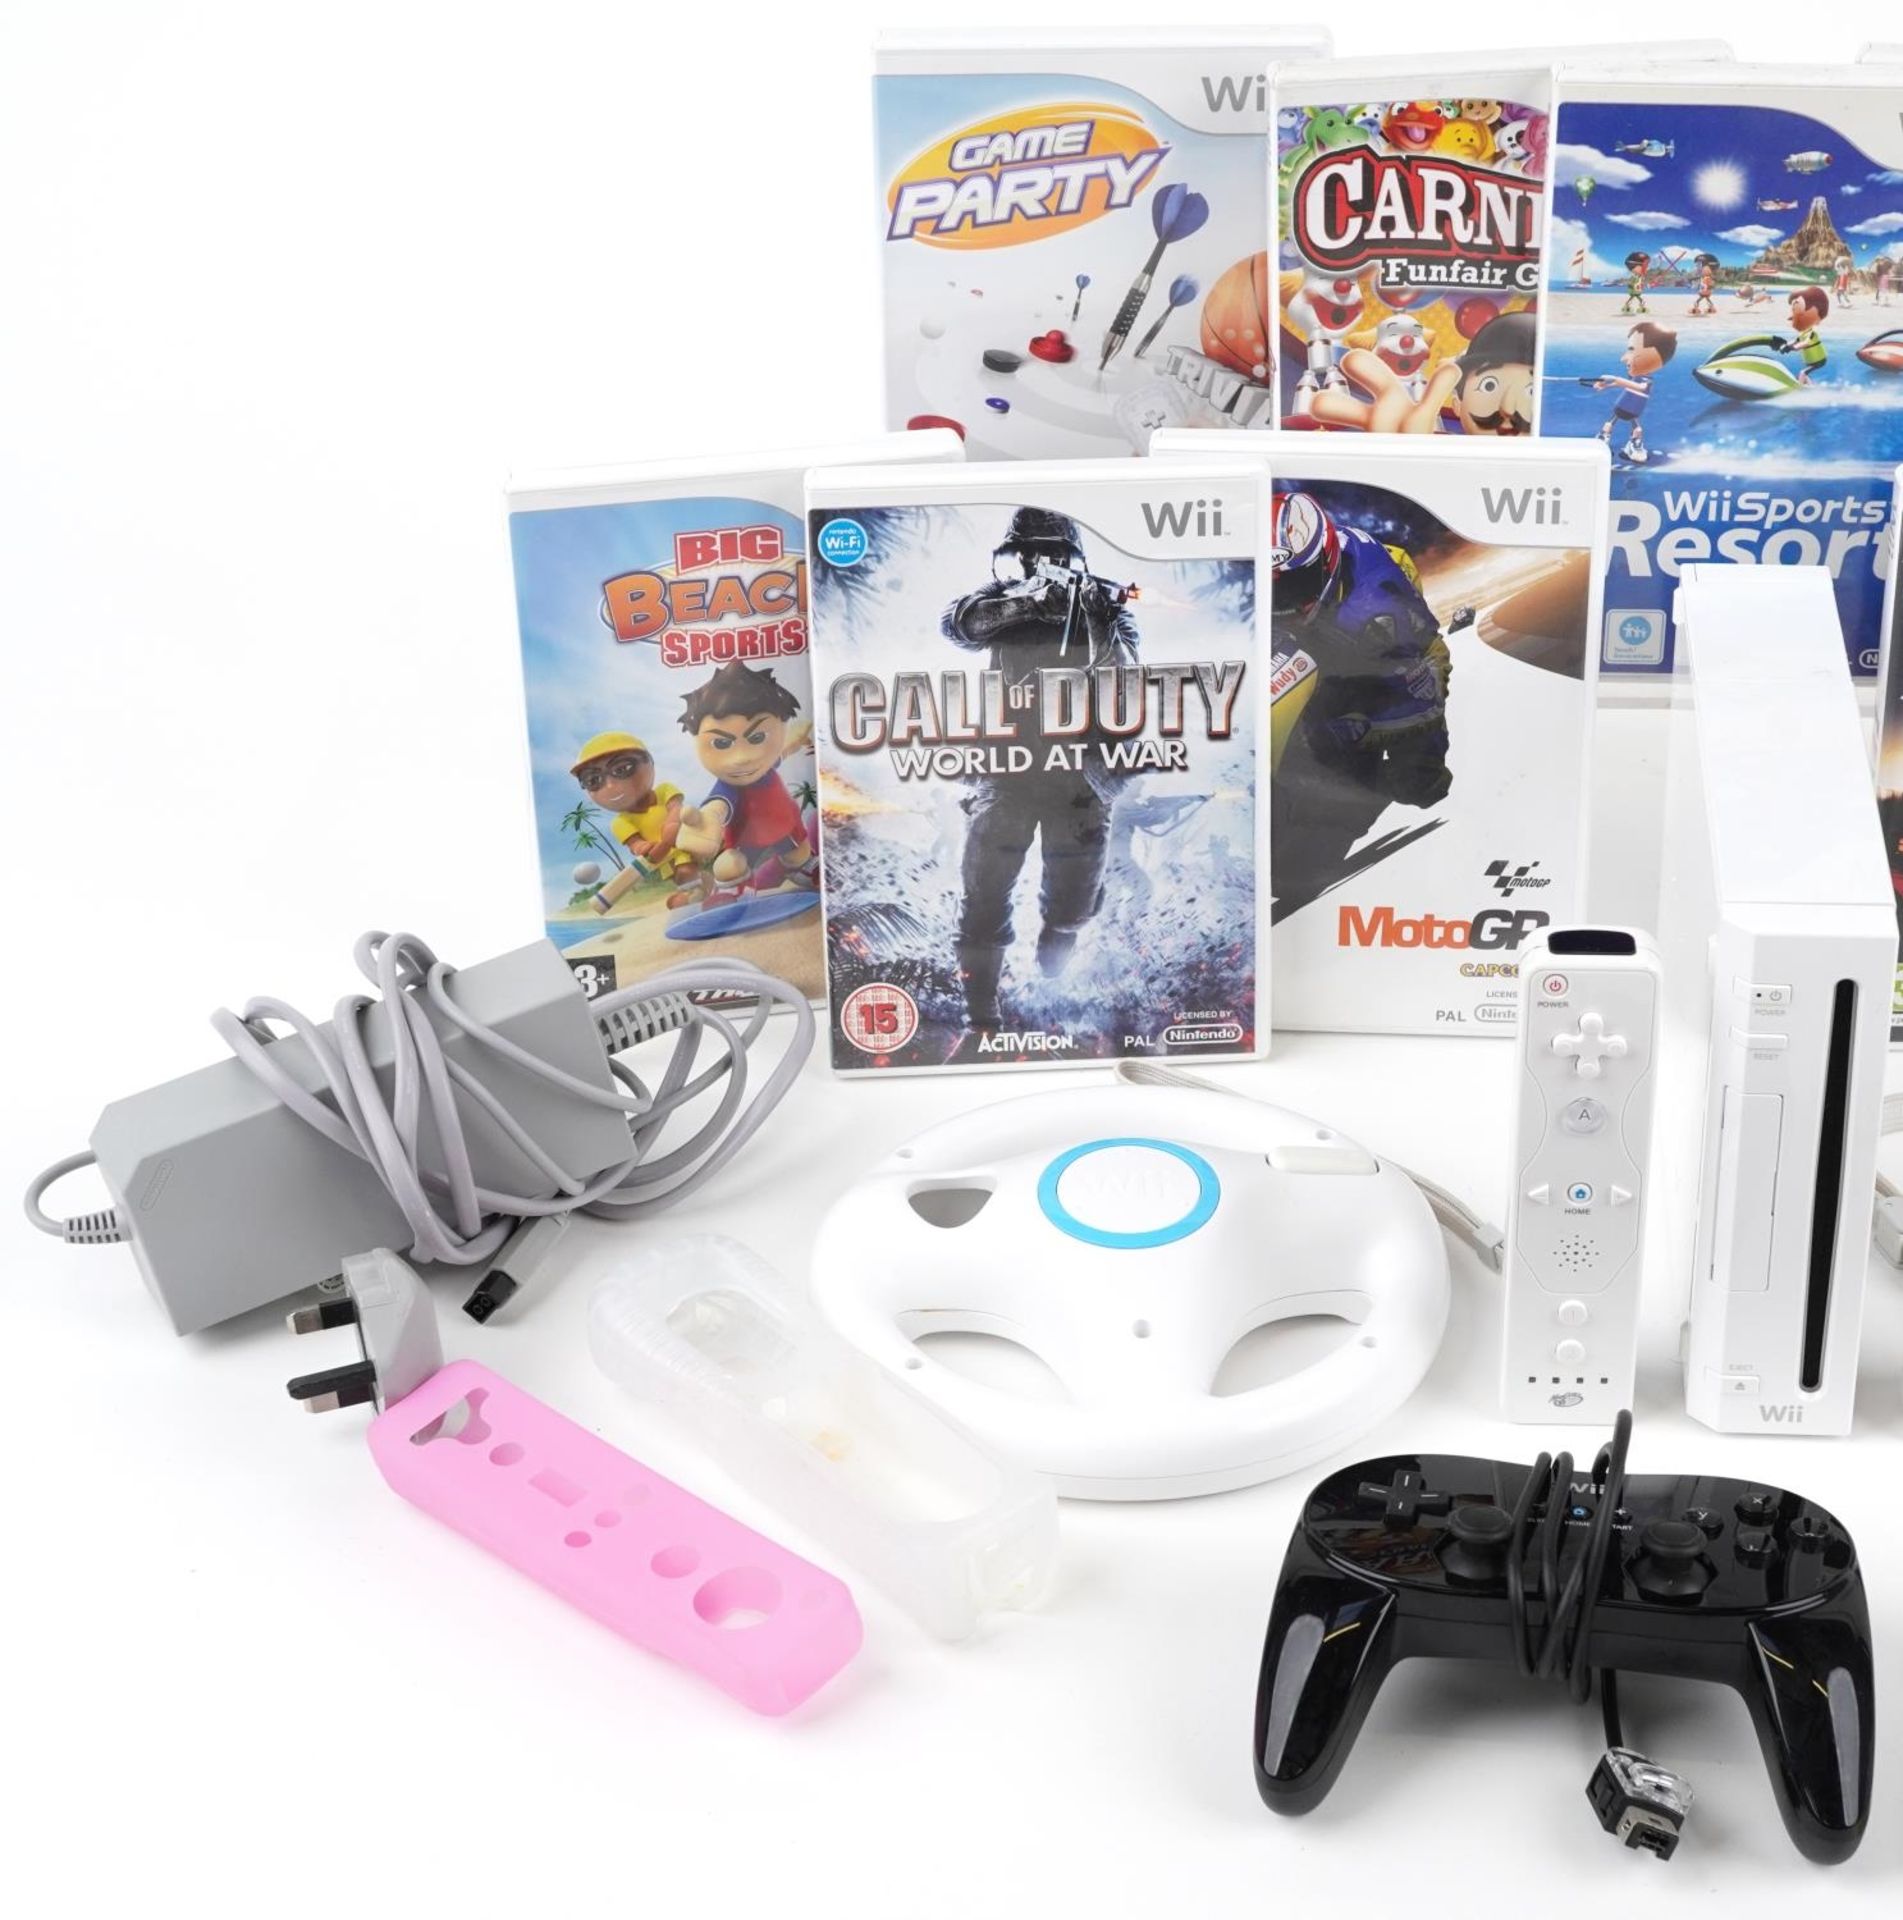 Nintendo Wii games console with controllers, accessories and a collection of games - Image 2 of 3